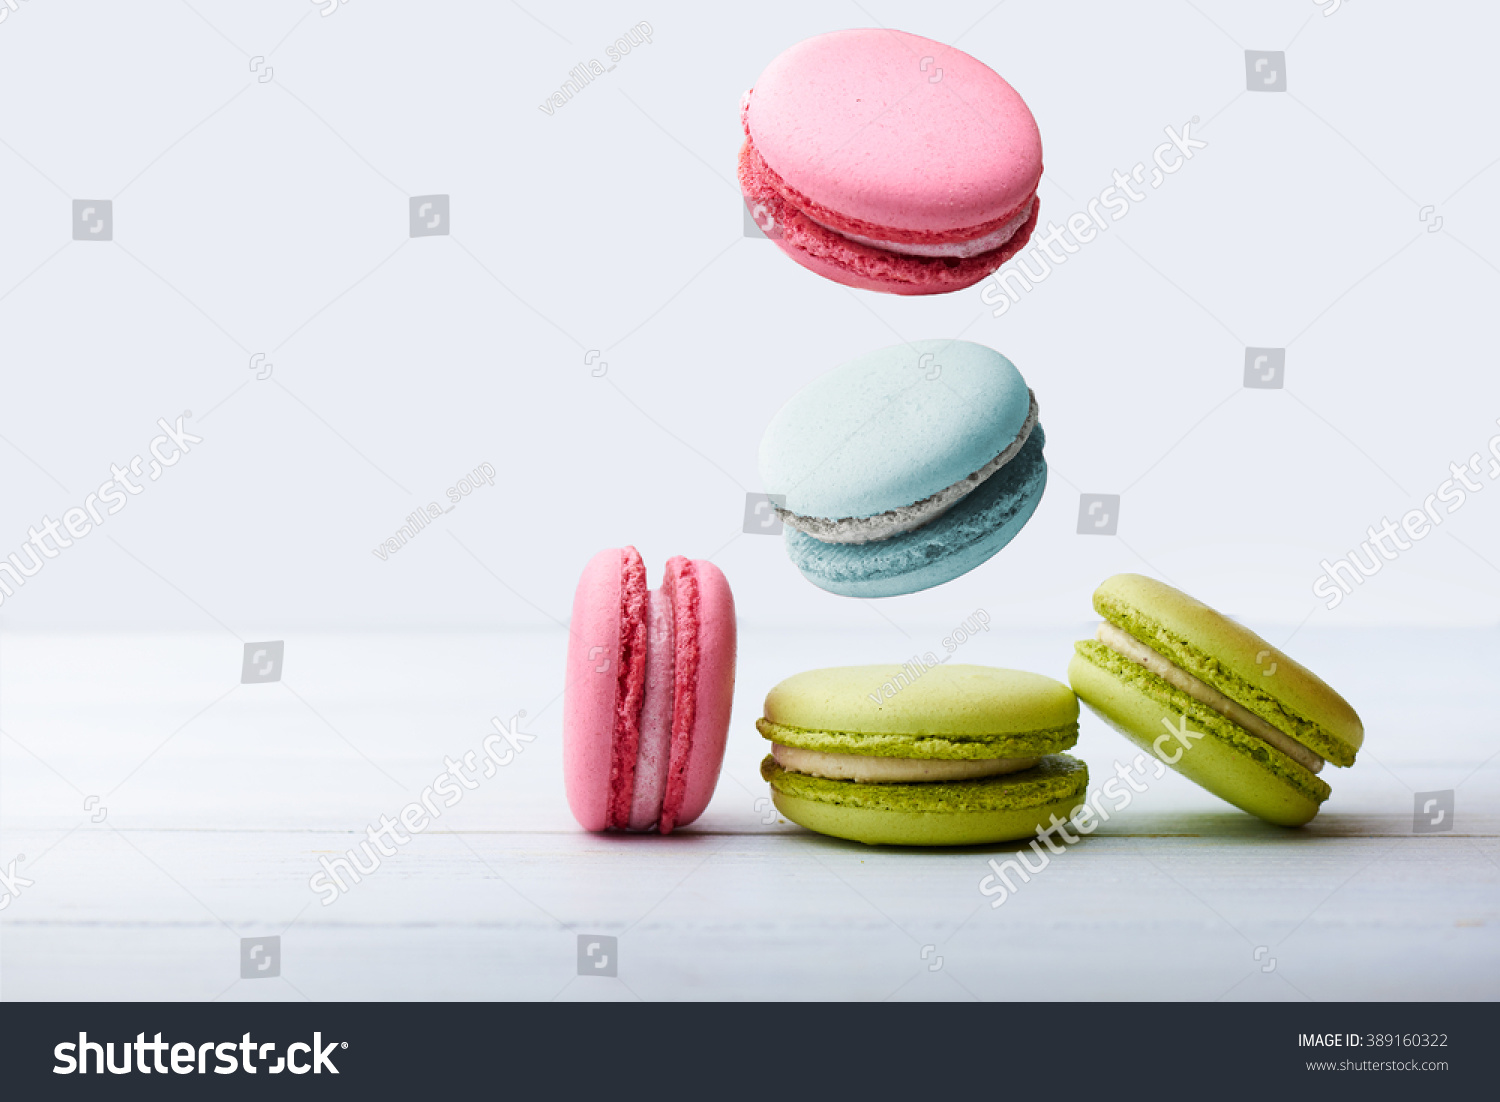 Different Types Macaroons Motion Falling On Stock Photo 389160322 ...